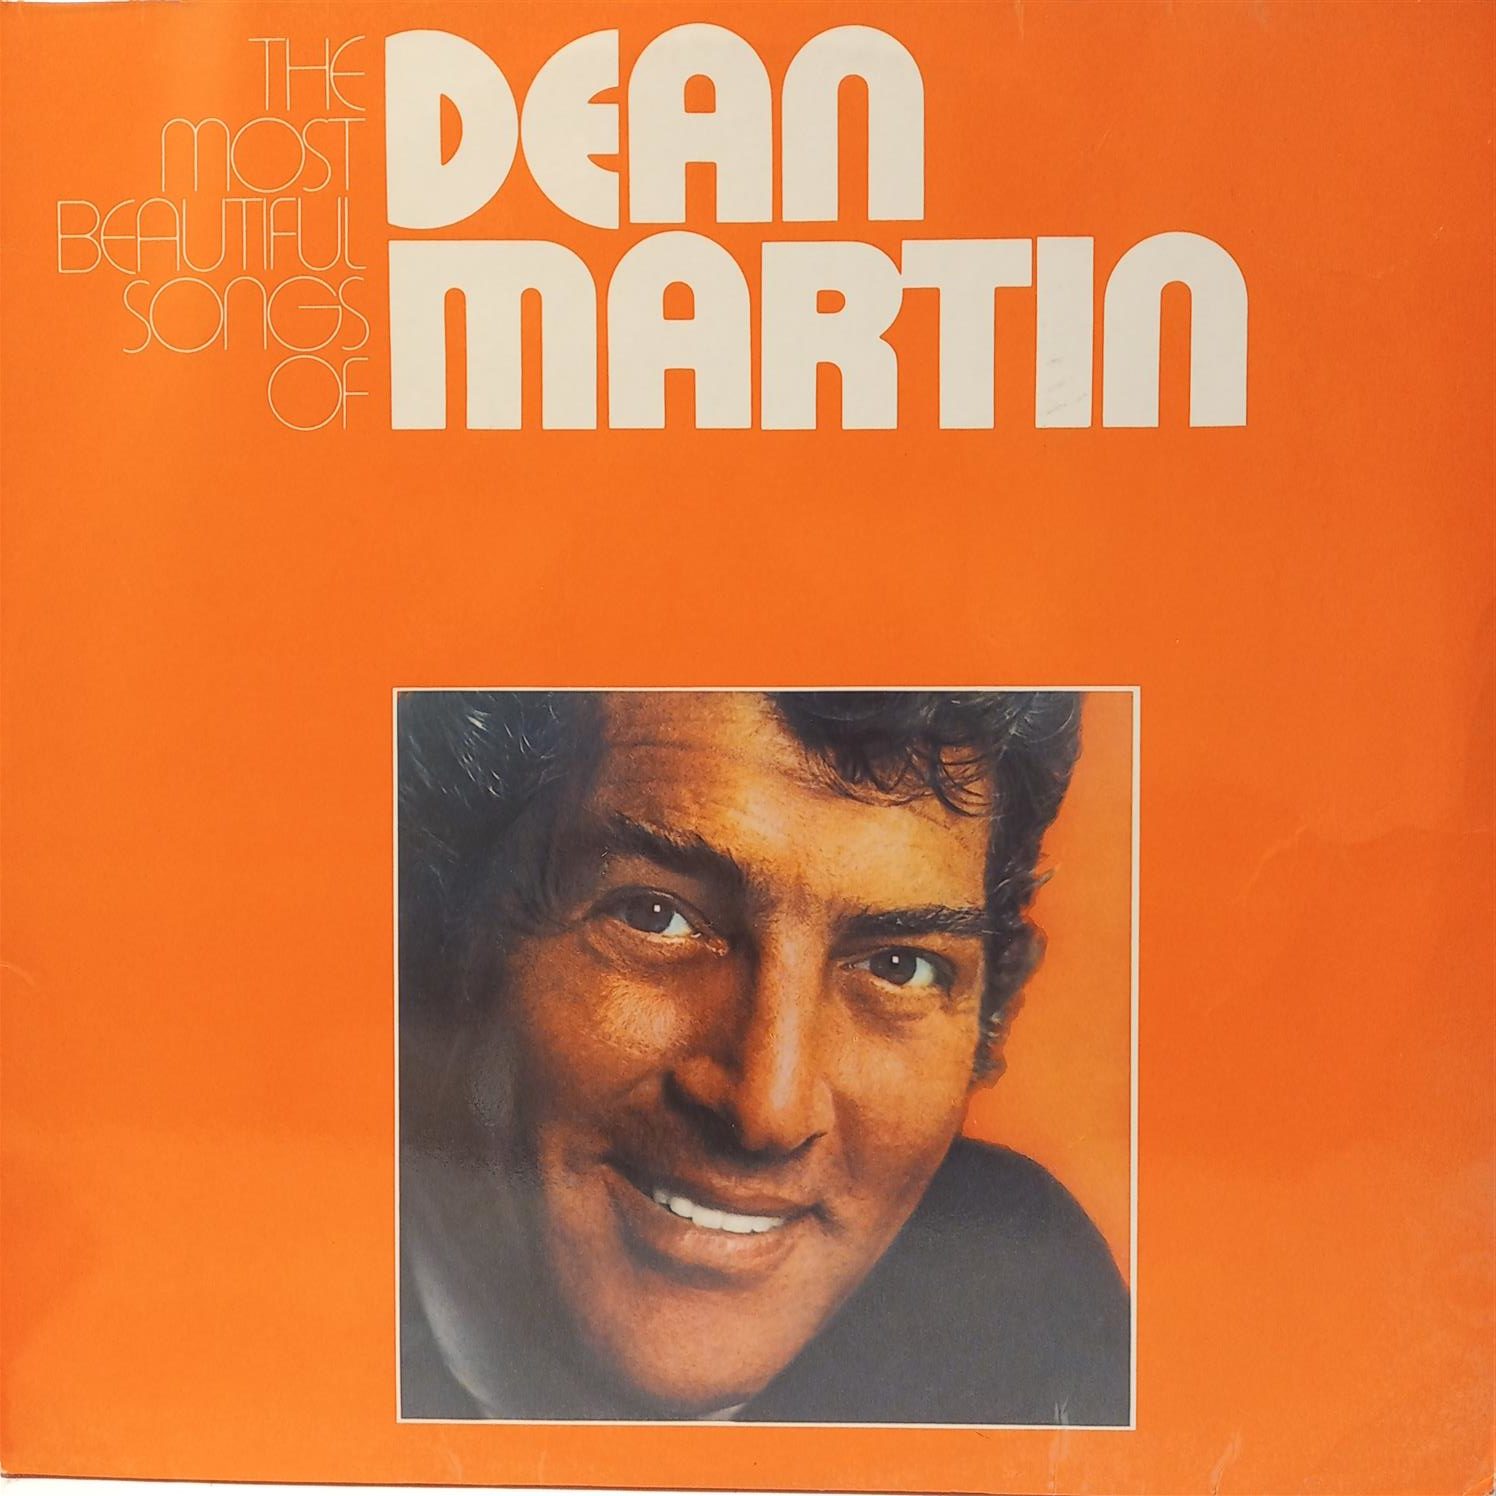 DEAN MARTIN – THE MOST BEAUTIFUL SONGS OF DEAN MARTIN ON